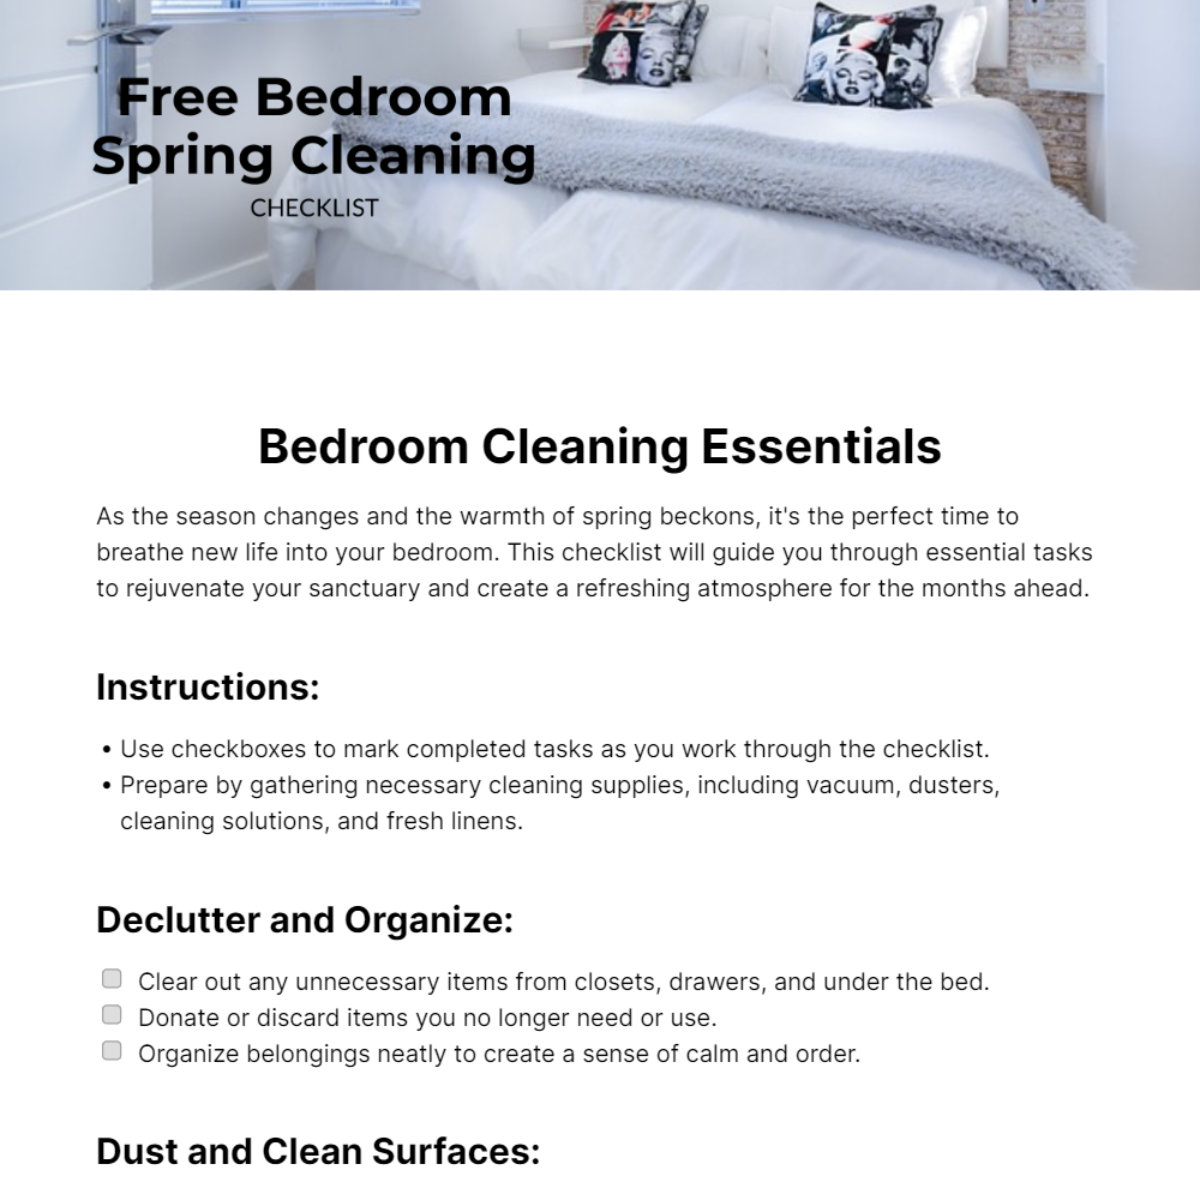 Bedroom Spring Cleaning Checklist Template